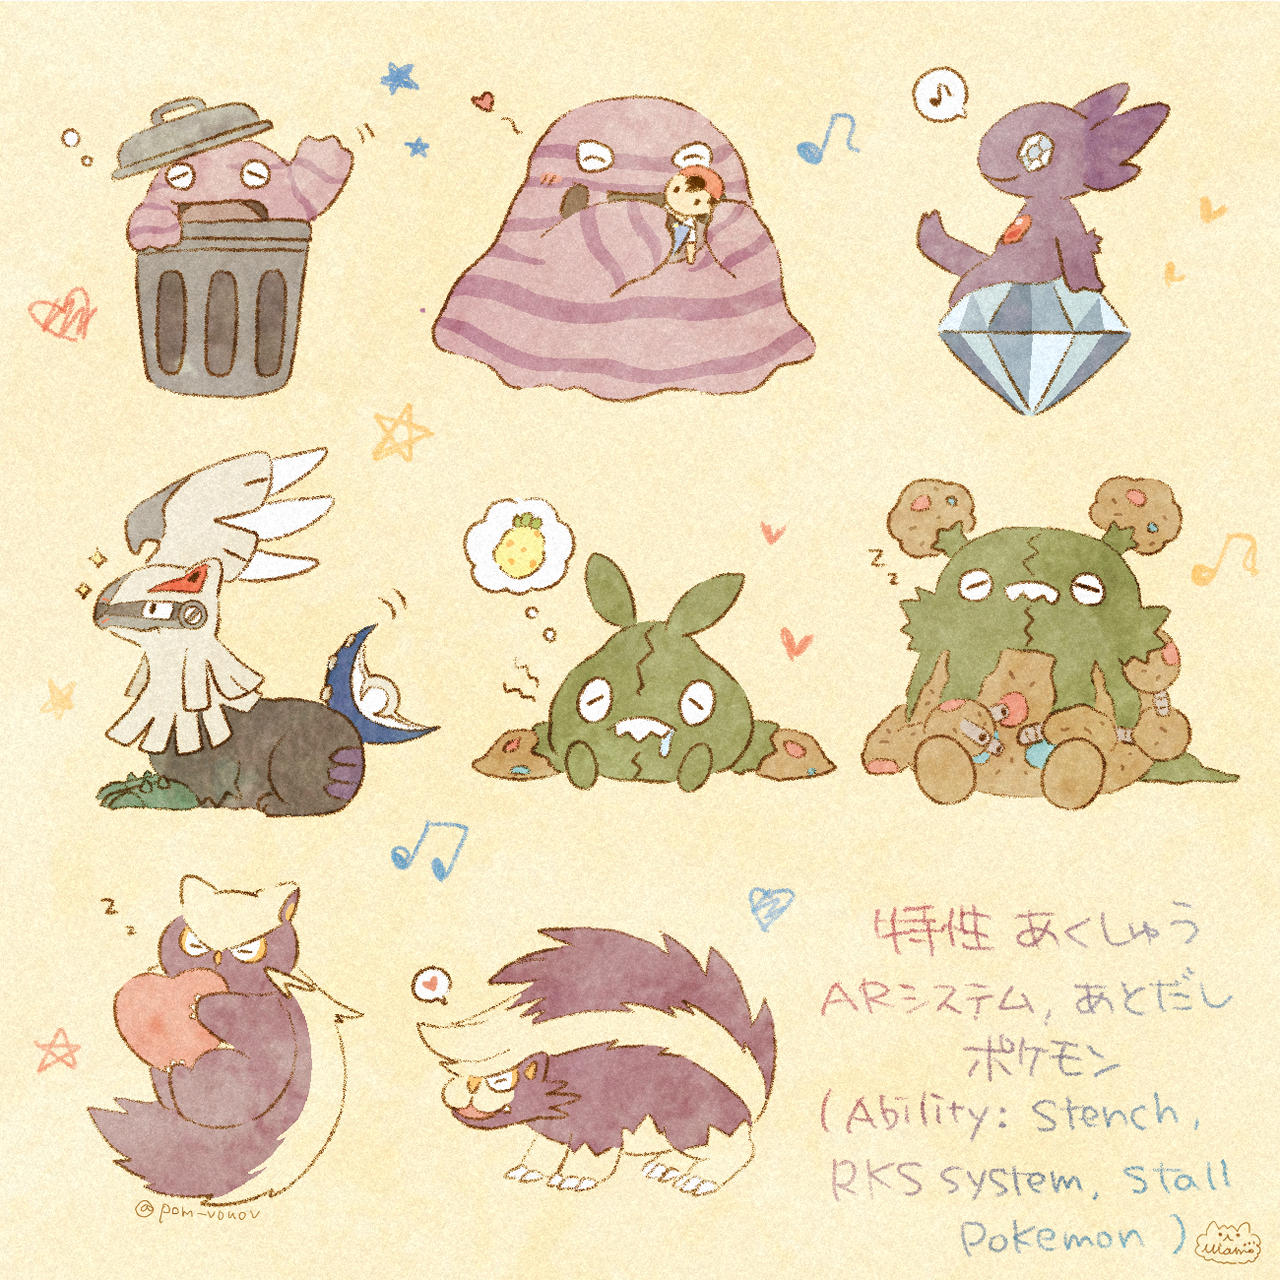 Ability: Stench, RKS system, Stall Pokemon by Mions-Art on DeviantArt